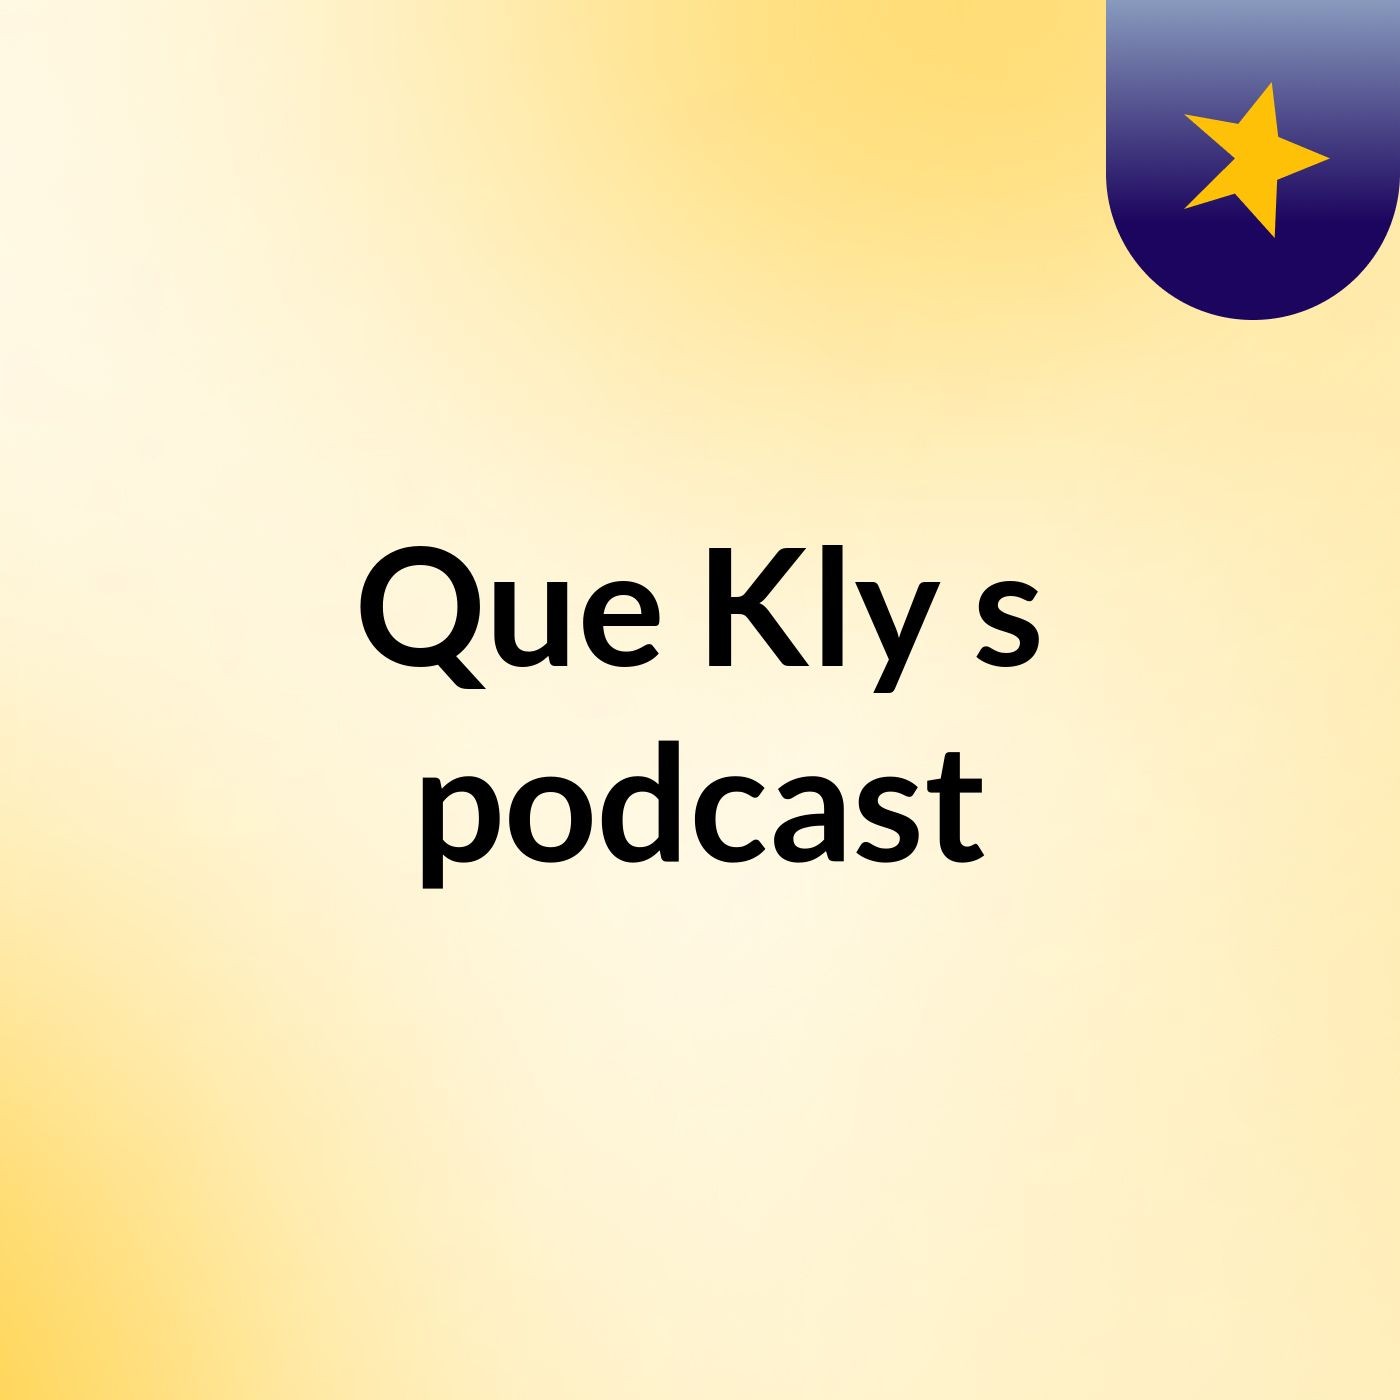 Que Kly's podcast